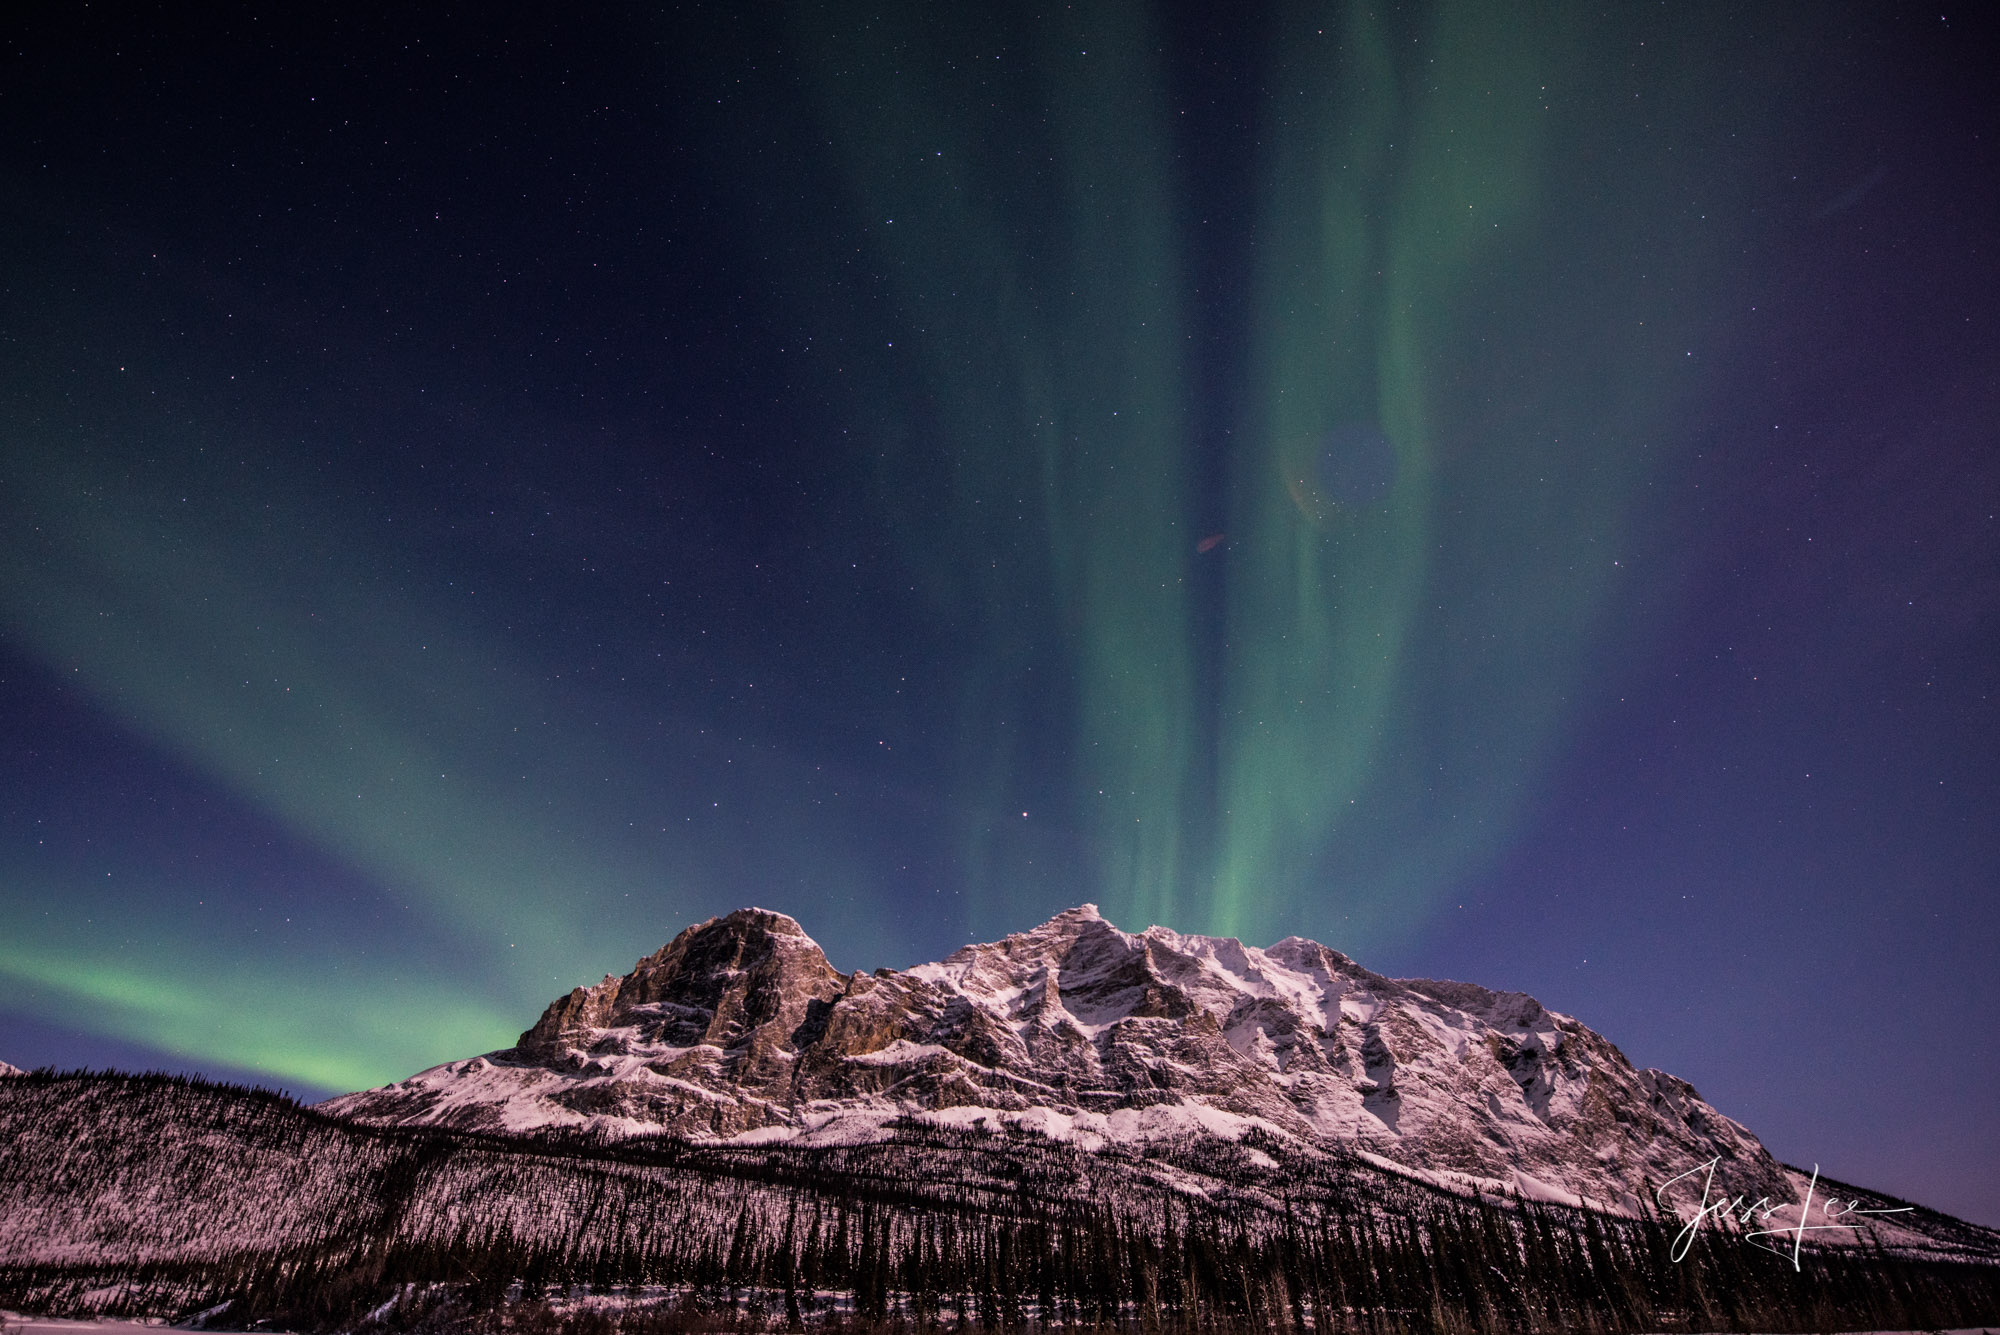 Mountain range in Alaska with the aurora borealis putting on a show behind it. 